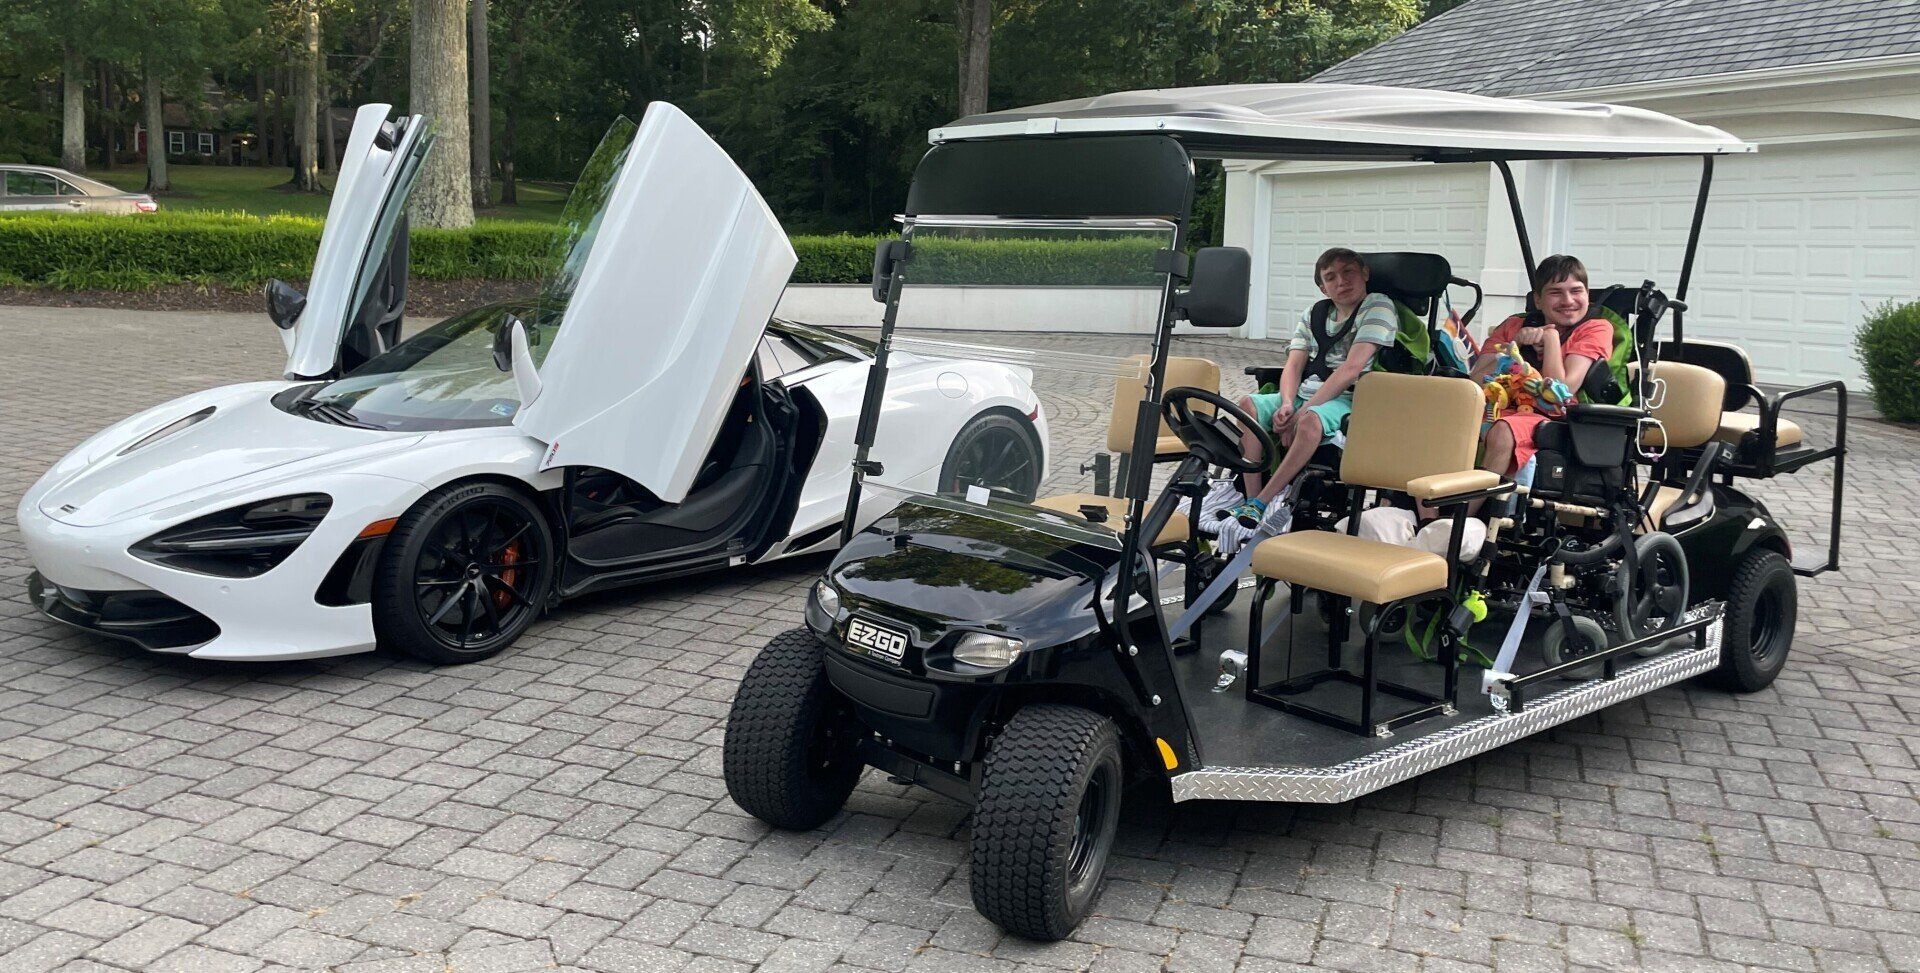 PHED Mobility dual wheelchair golf cart RIDEABOUT can comfortably transport two wheelchair users at the same time.